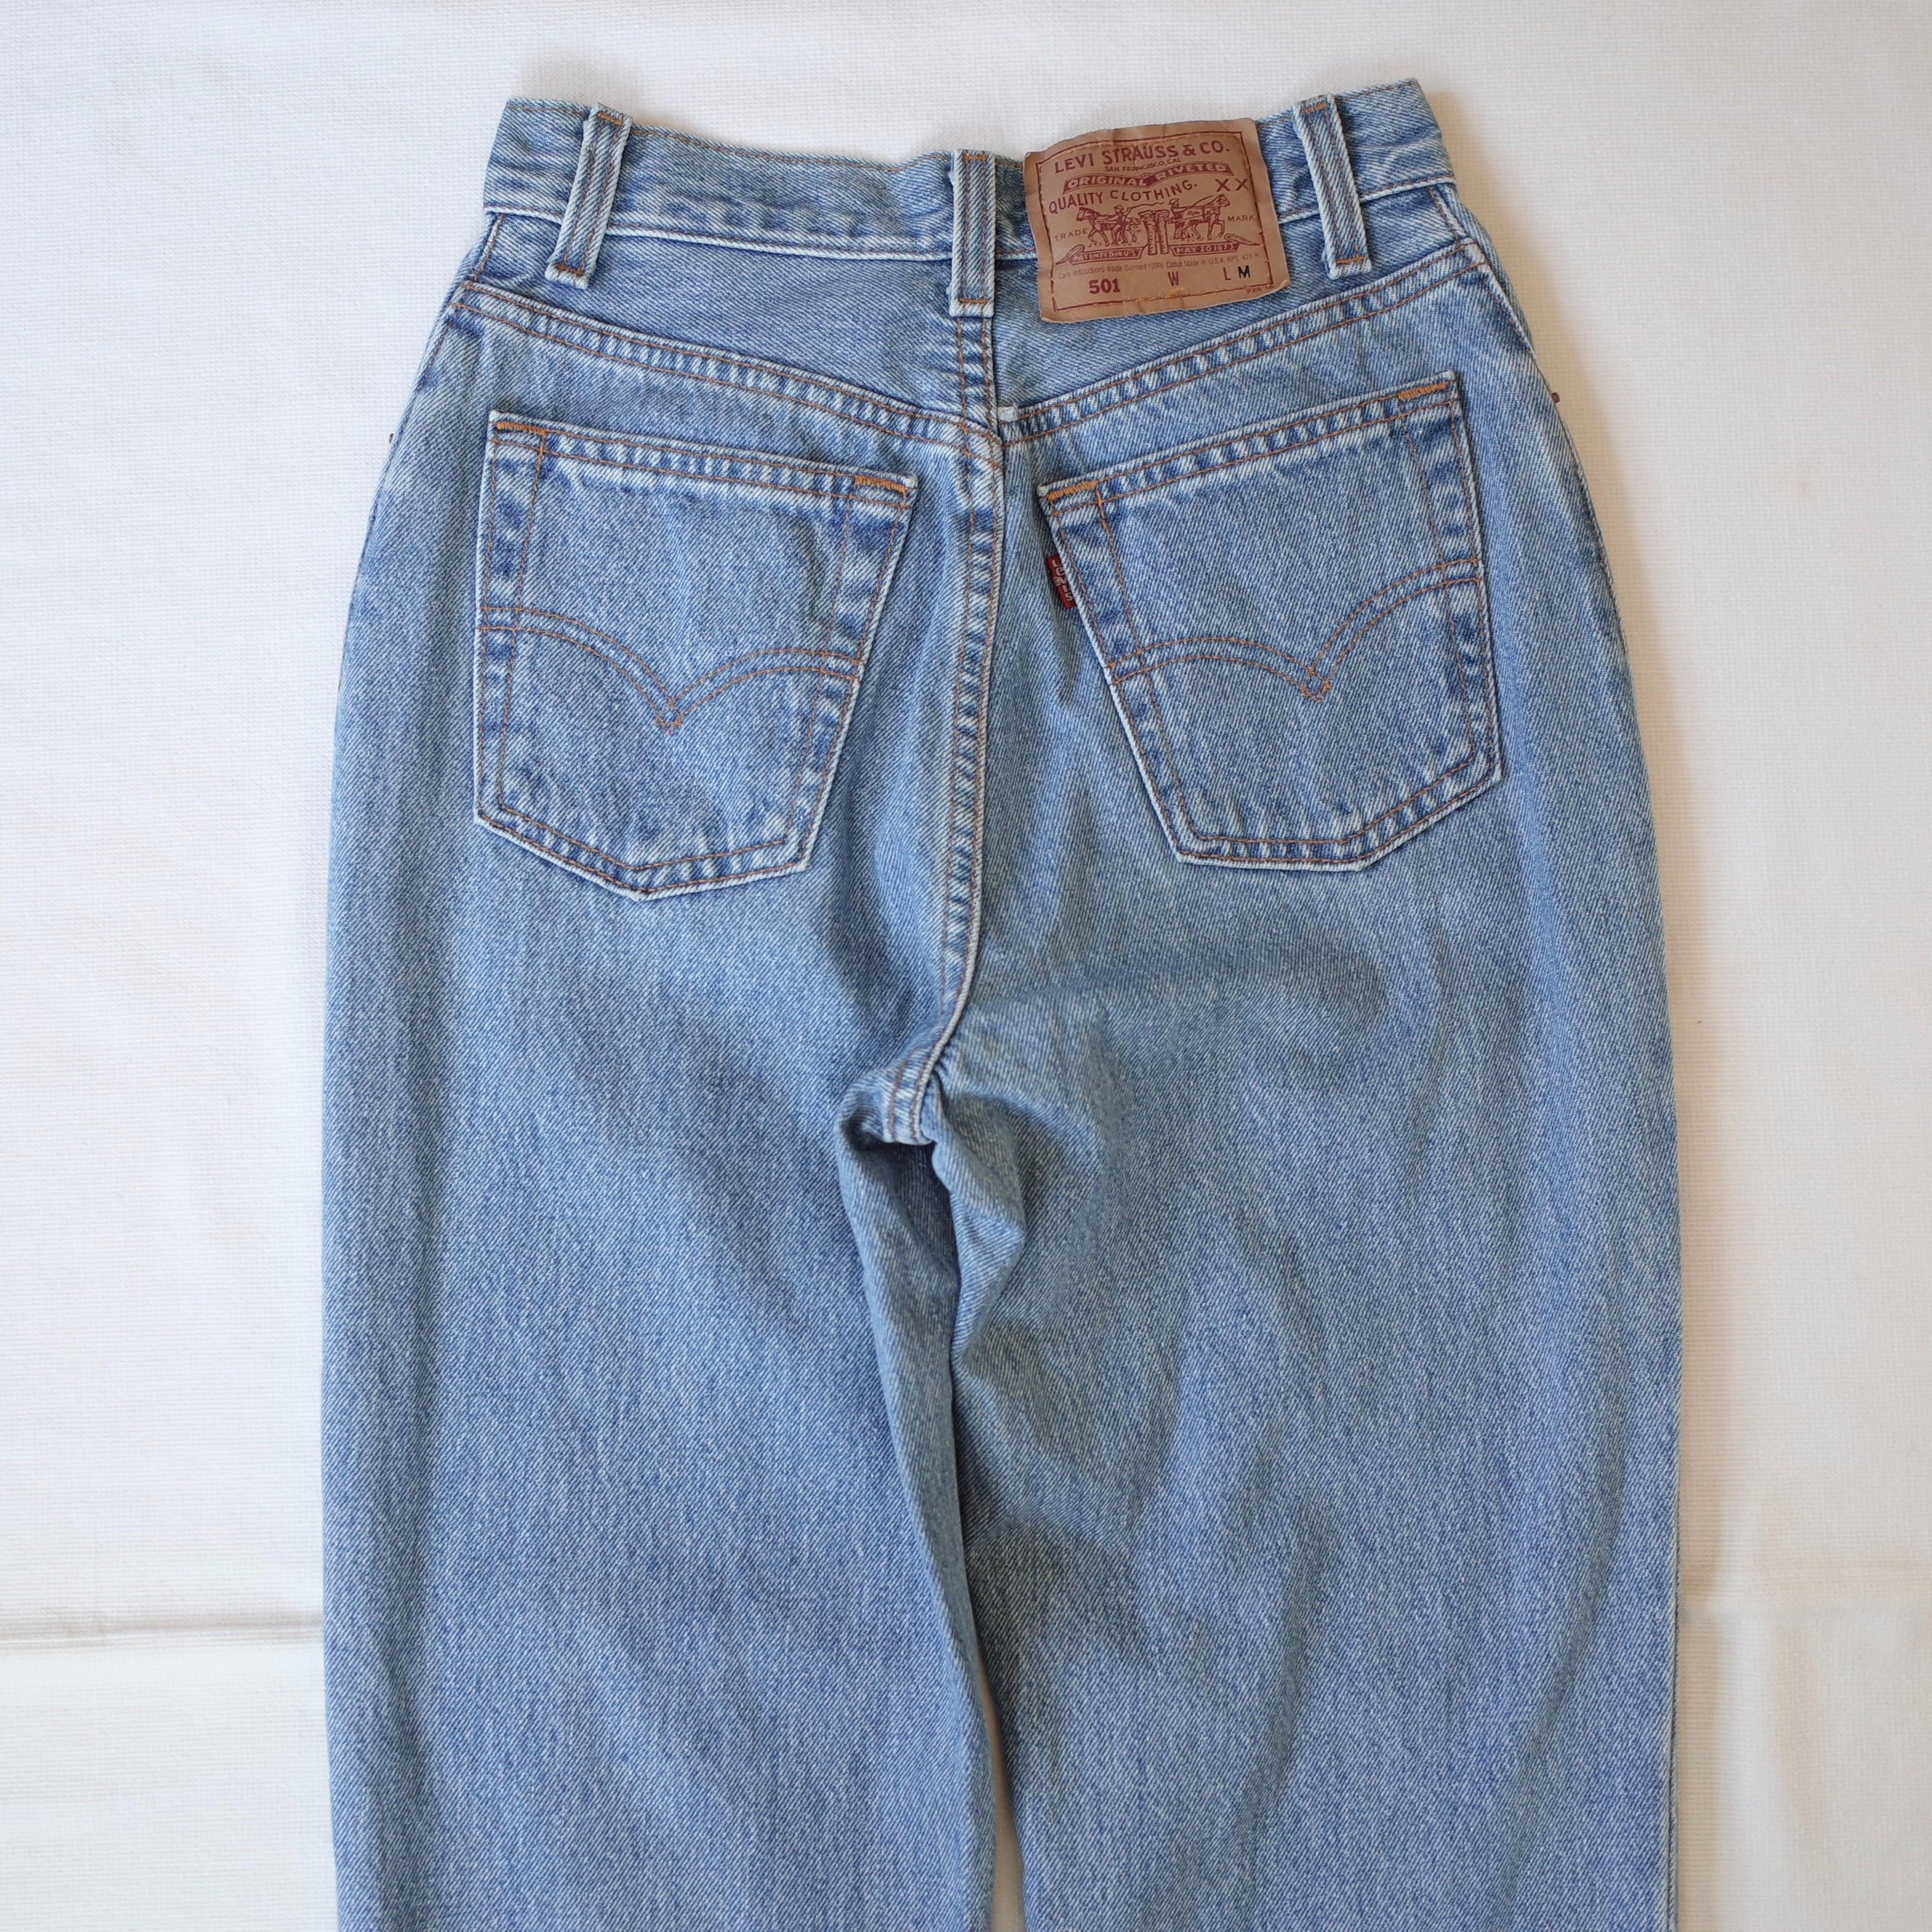 LEVI'S 17501-0193 MADE IN USA DENIM PANT